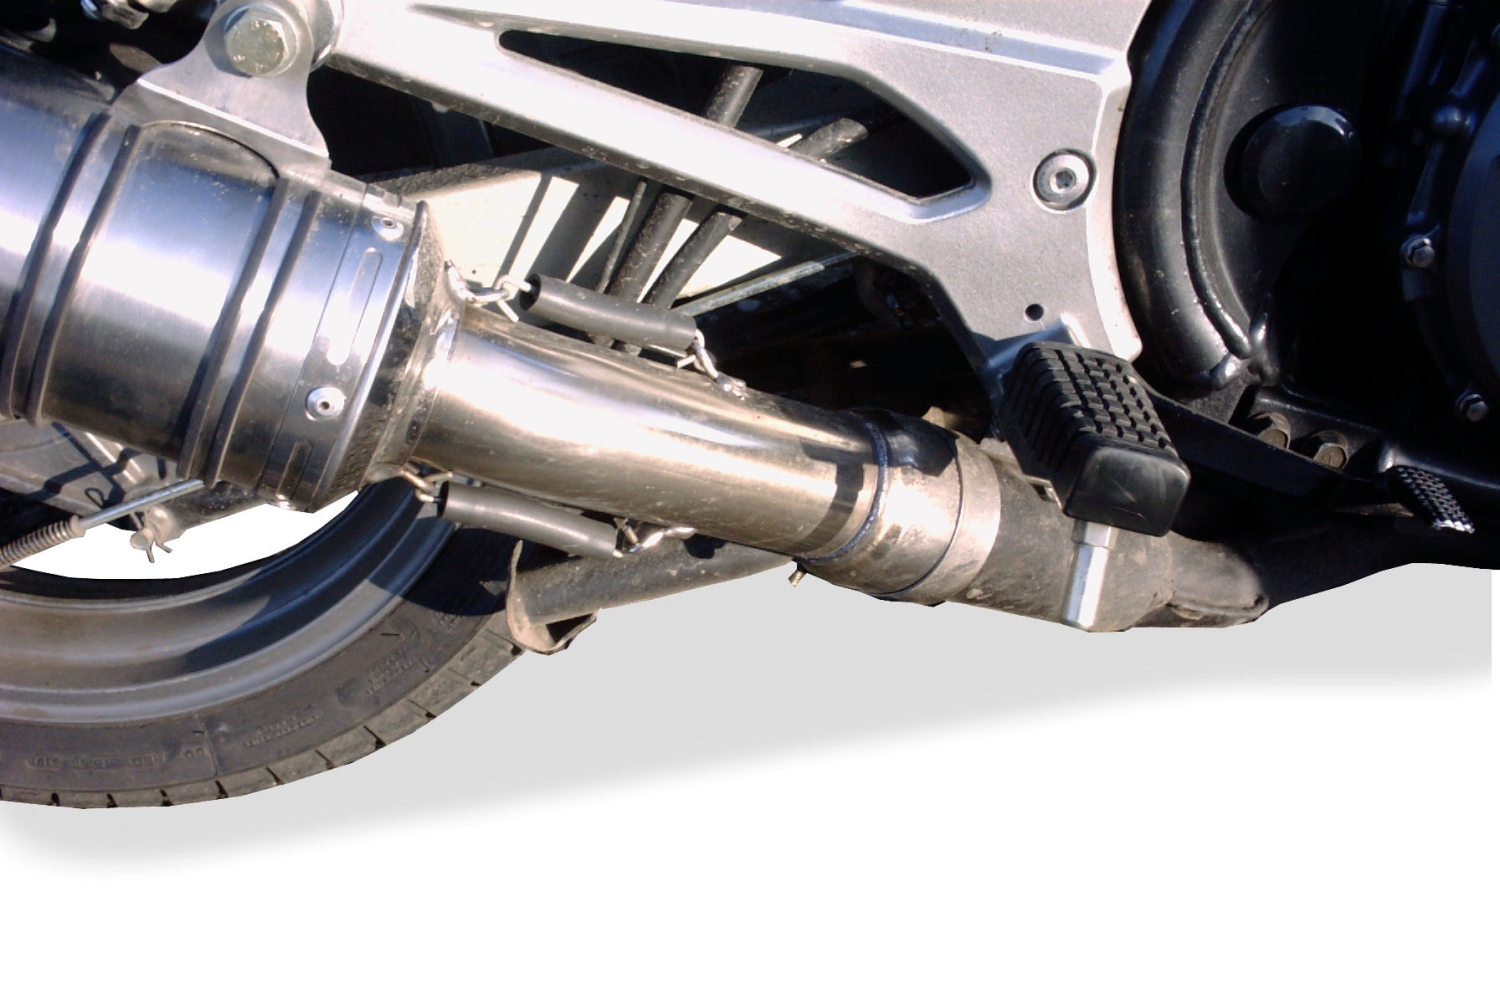 Exhaust system compatible with Kawasaki ER 5 1996-2006, Satinox, Homologated legal slip-on exhaust including removable db killer and link pipe 